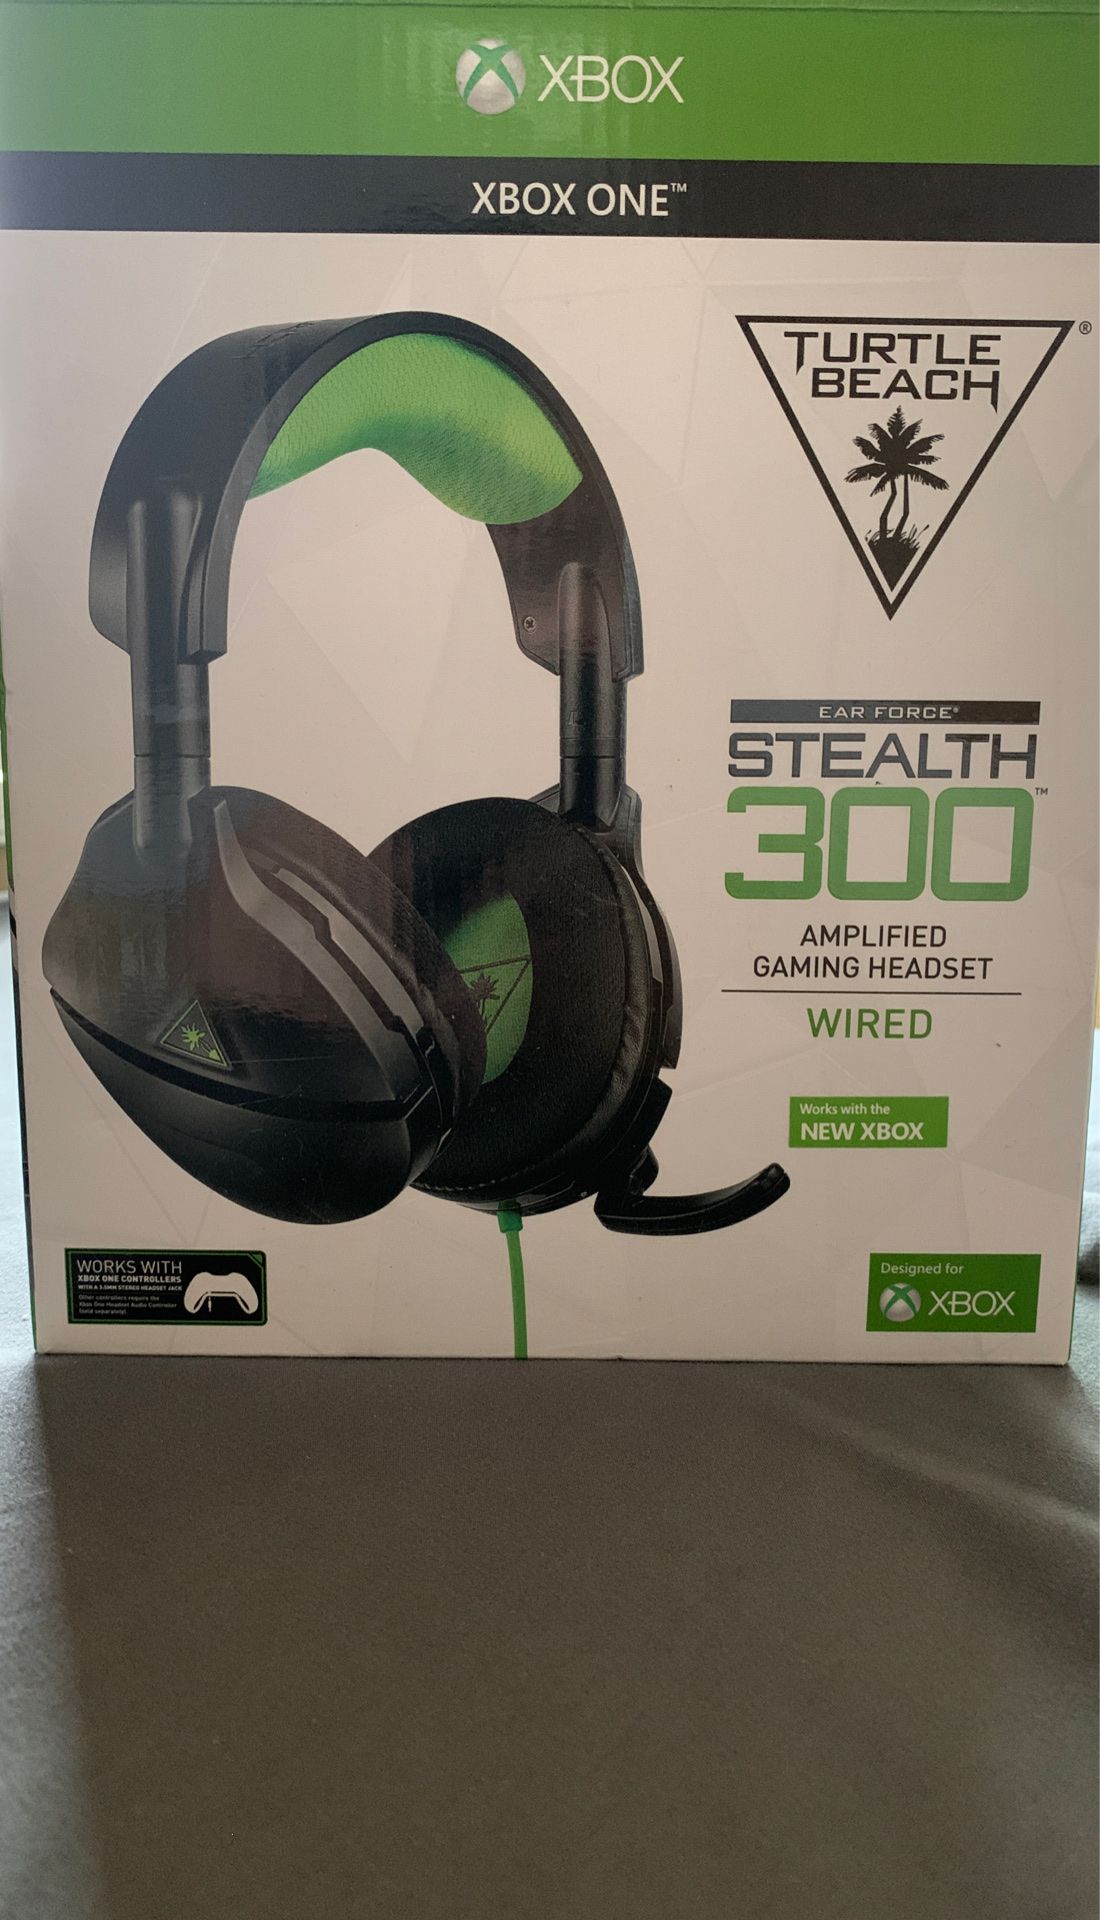 Turtle beach Stealth 300 Gaming Headset: No tears, perfect sound, only used for a month!